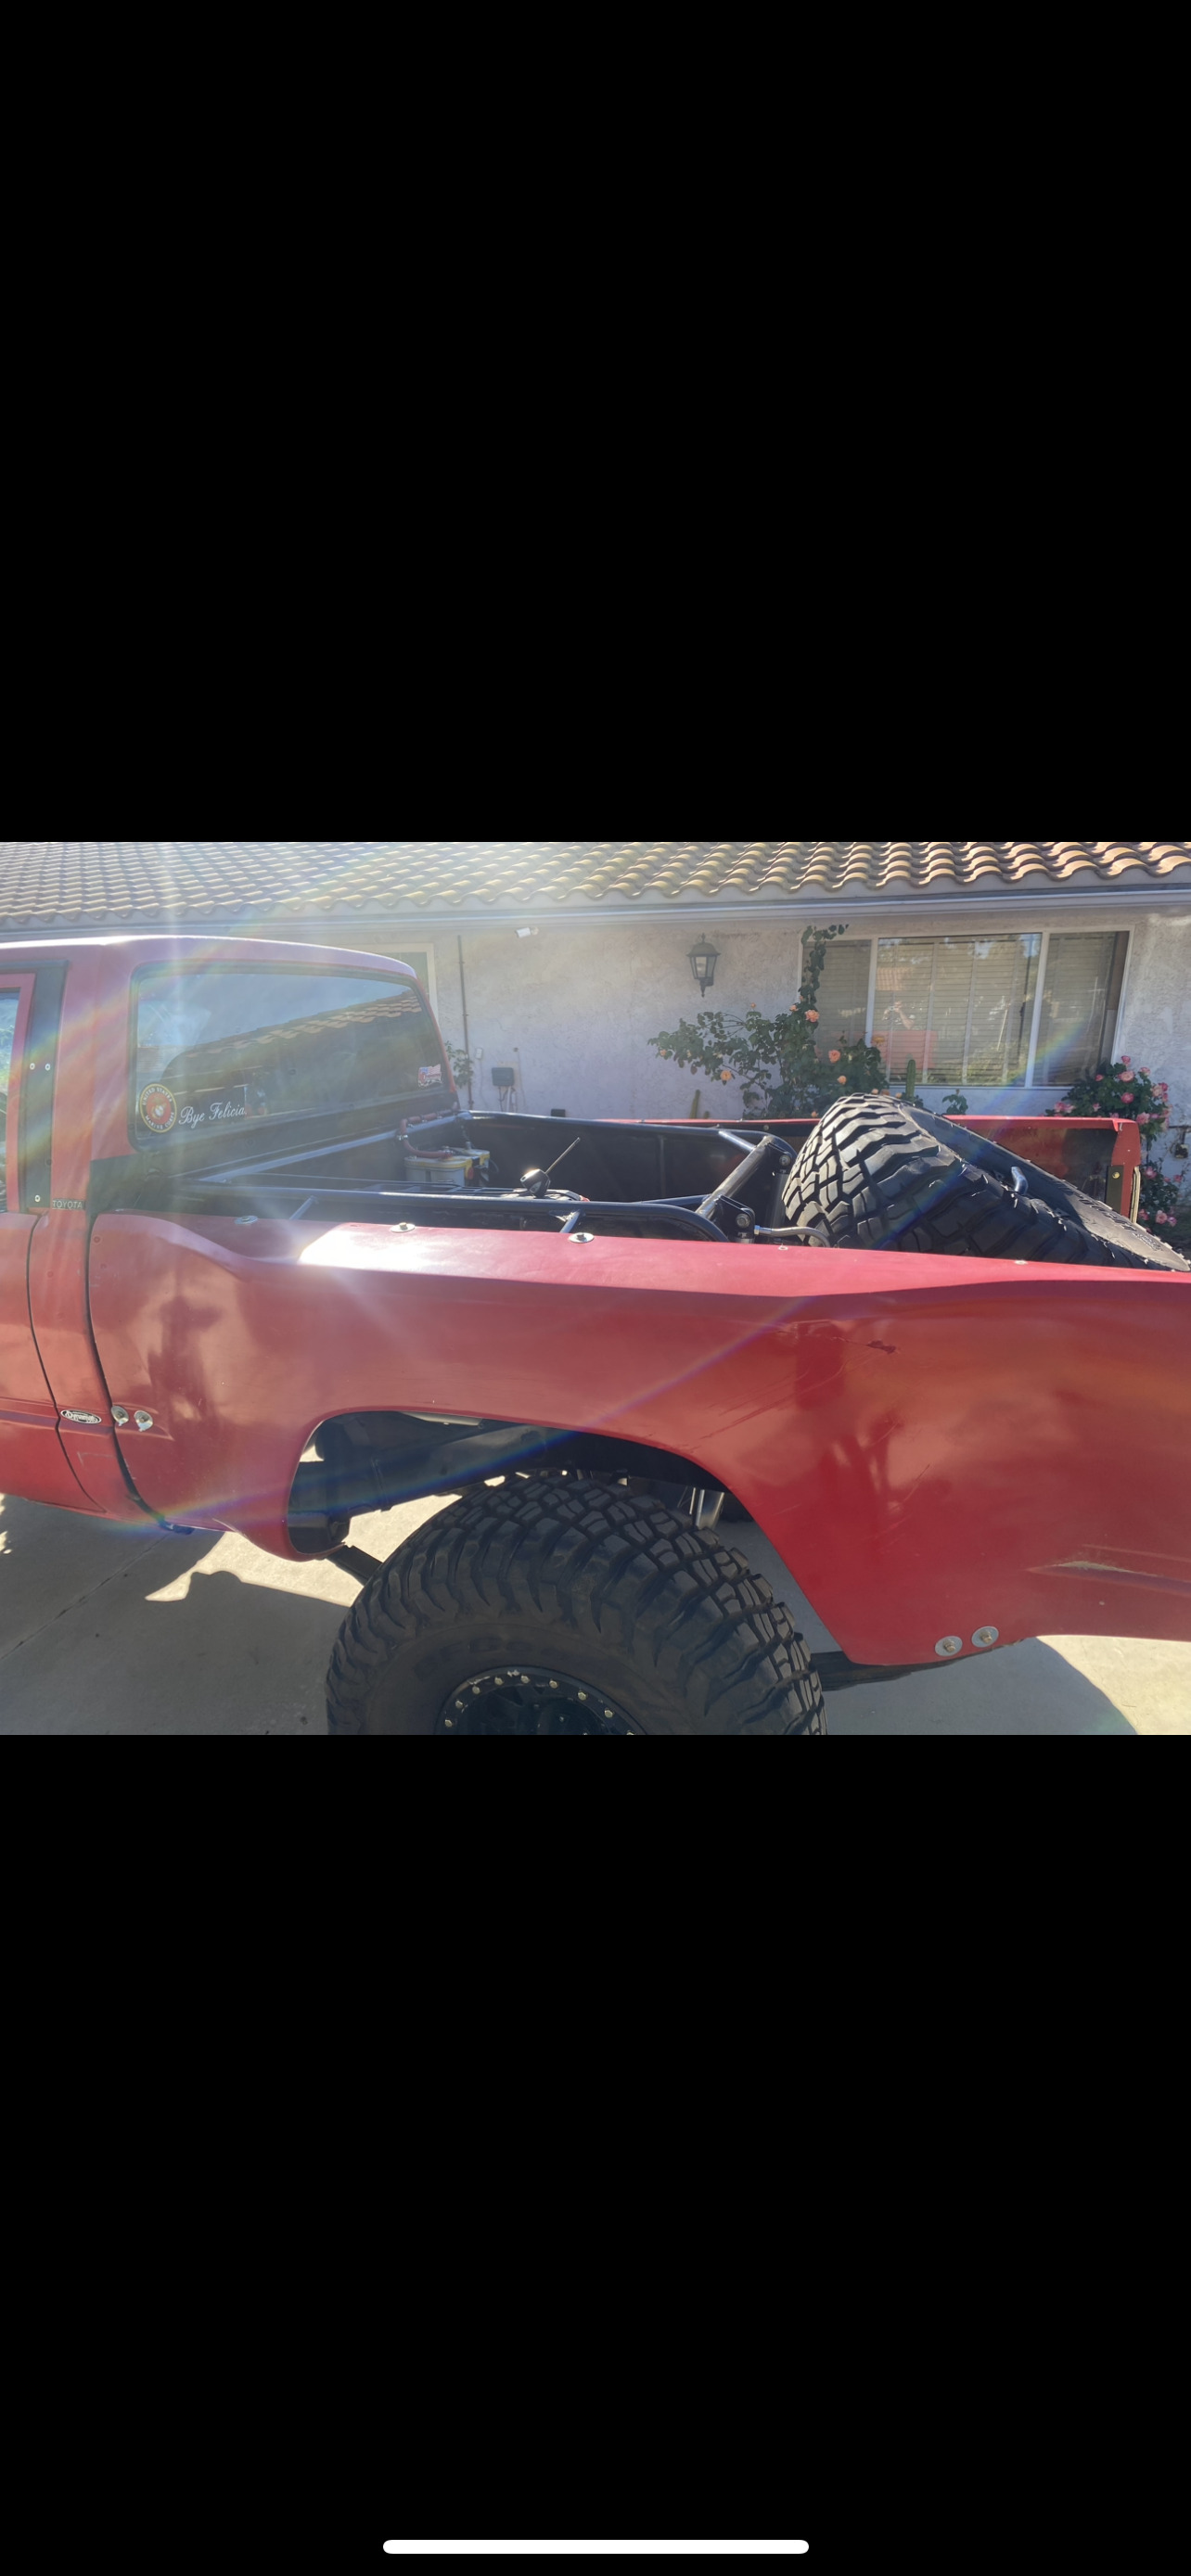 For Sale: Toyota pickup 4x4  - photo0